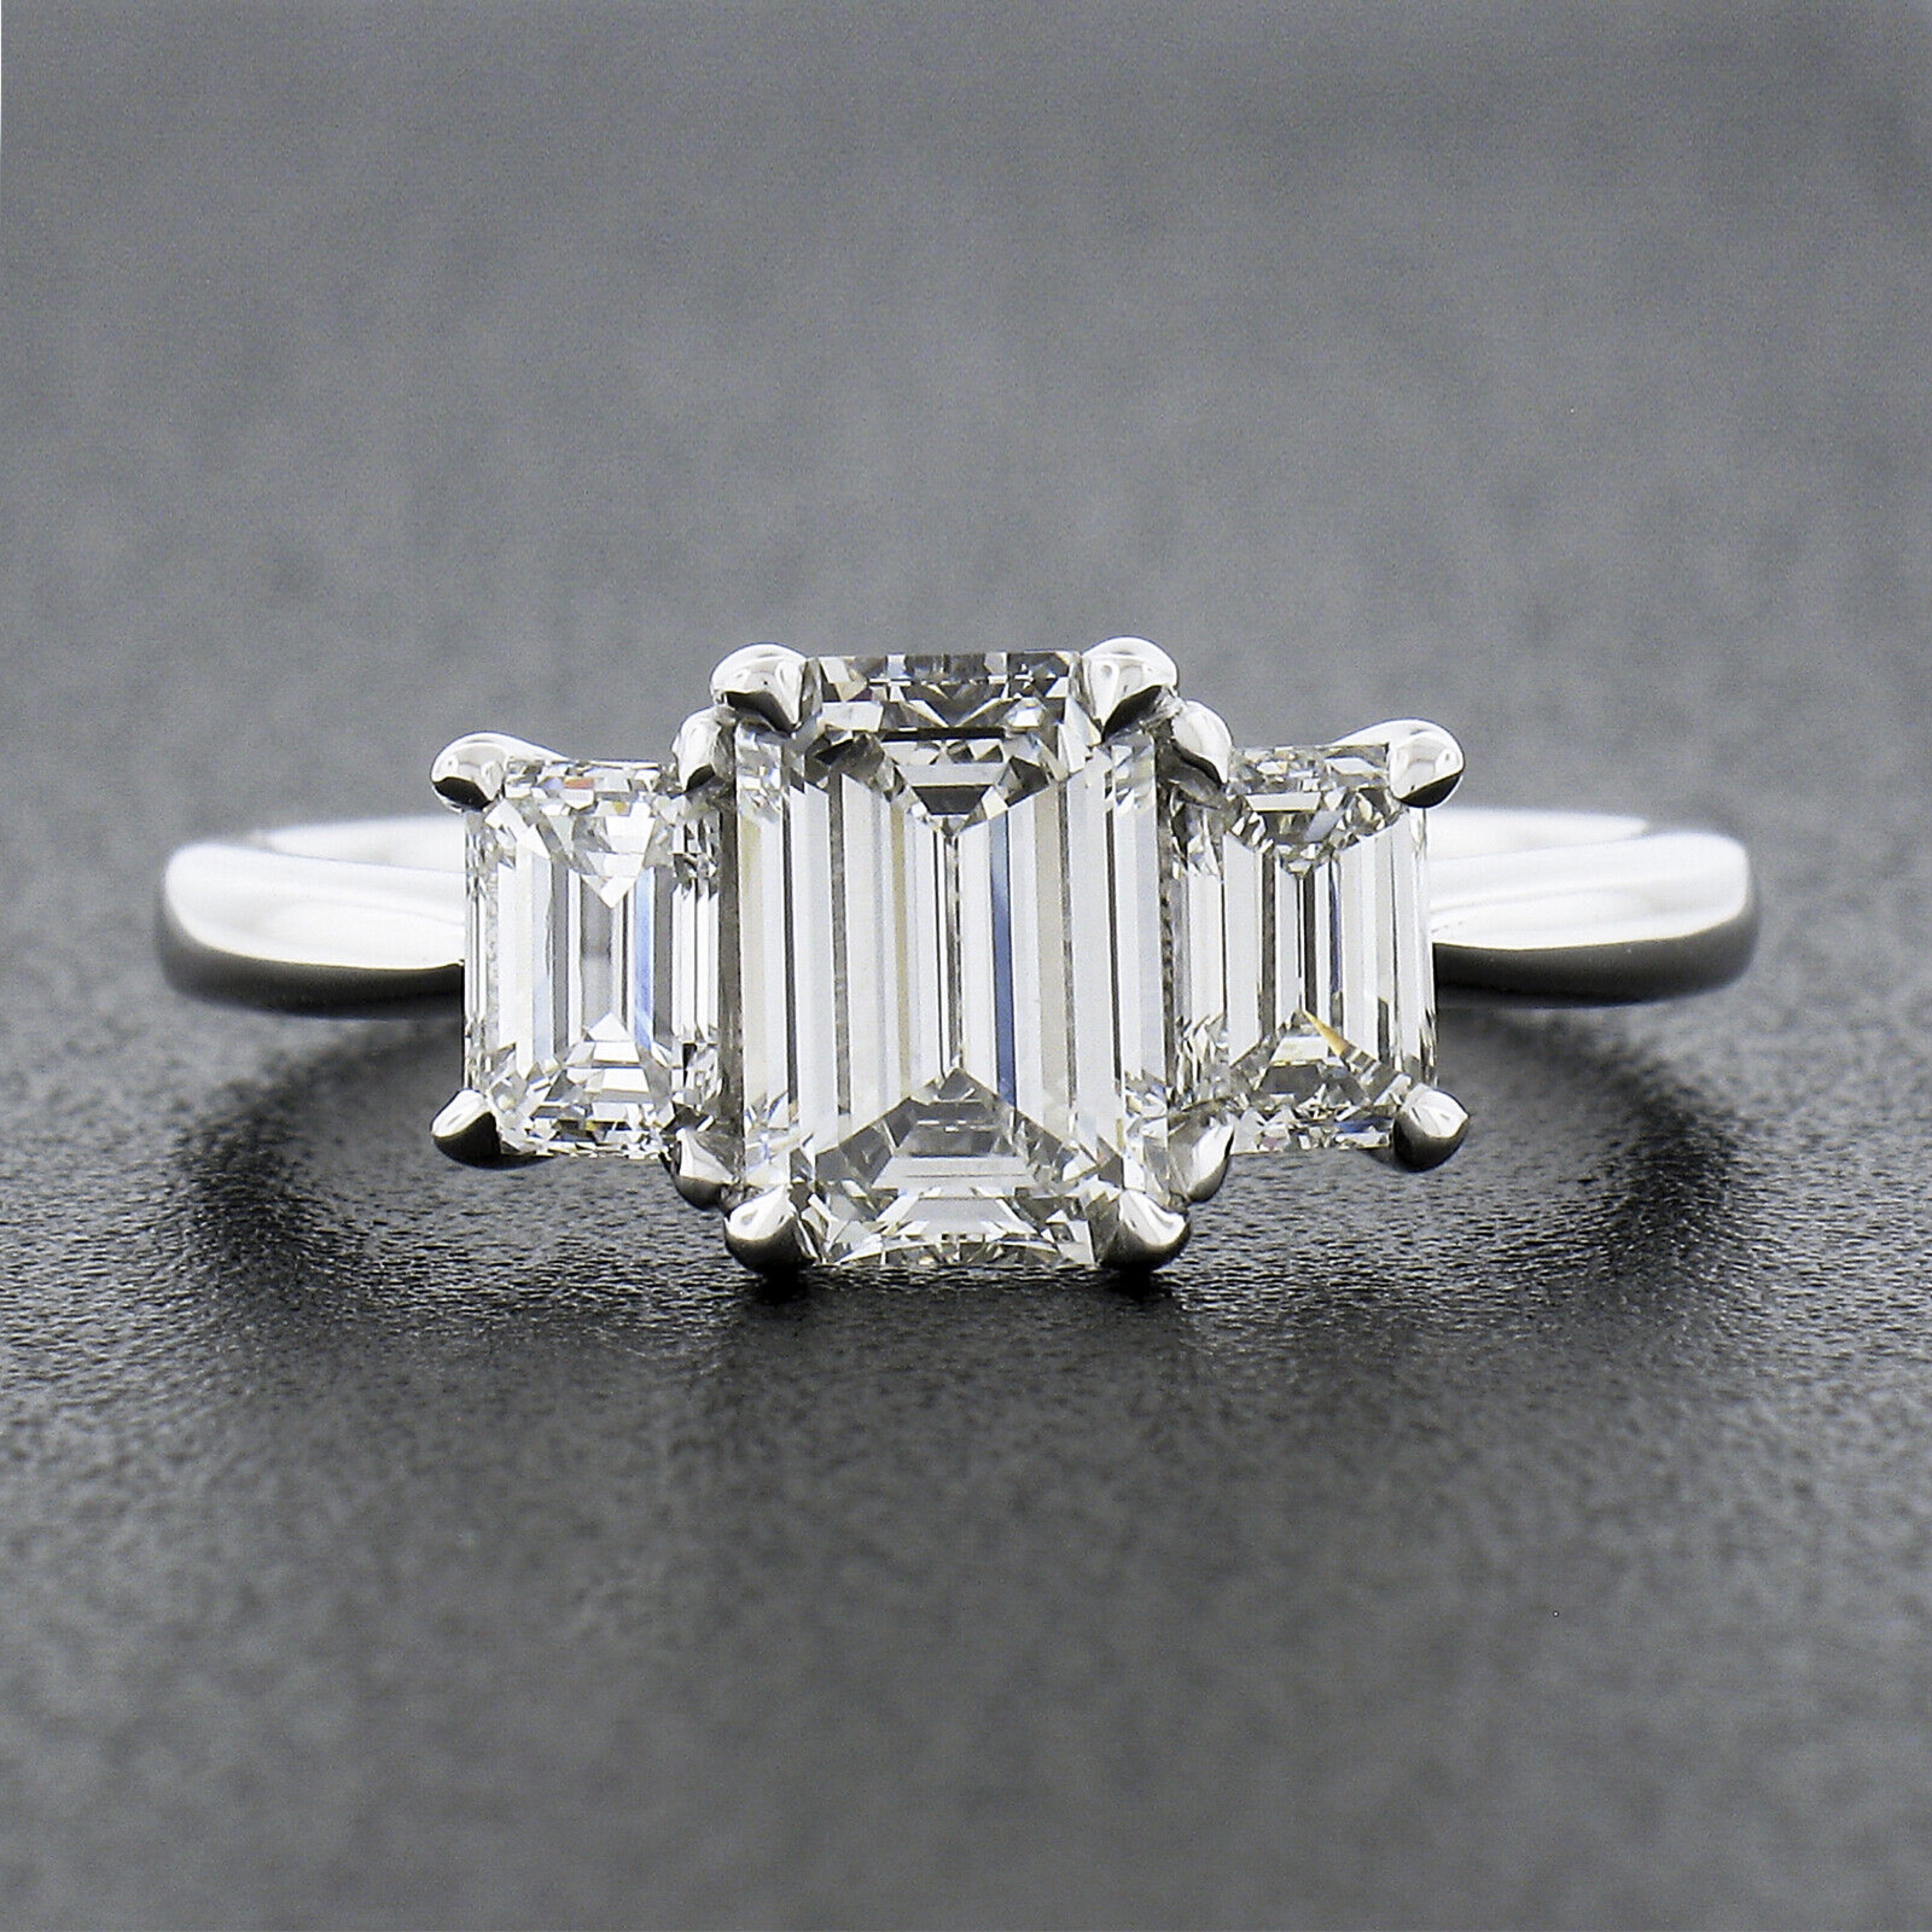 You are looking at a brand new and truly magnificent engagement style ring that was crafted from solid platinum. This incredible three stone ring features an absolutely breathtaking, GIA certified, emerald cut diamond neatly set with claw prongs at